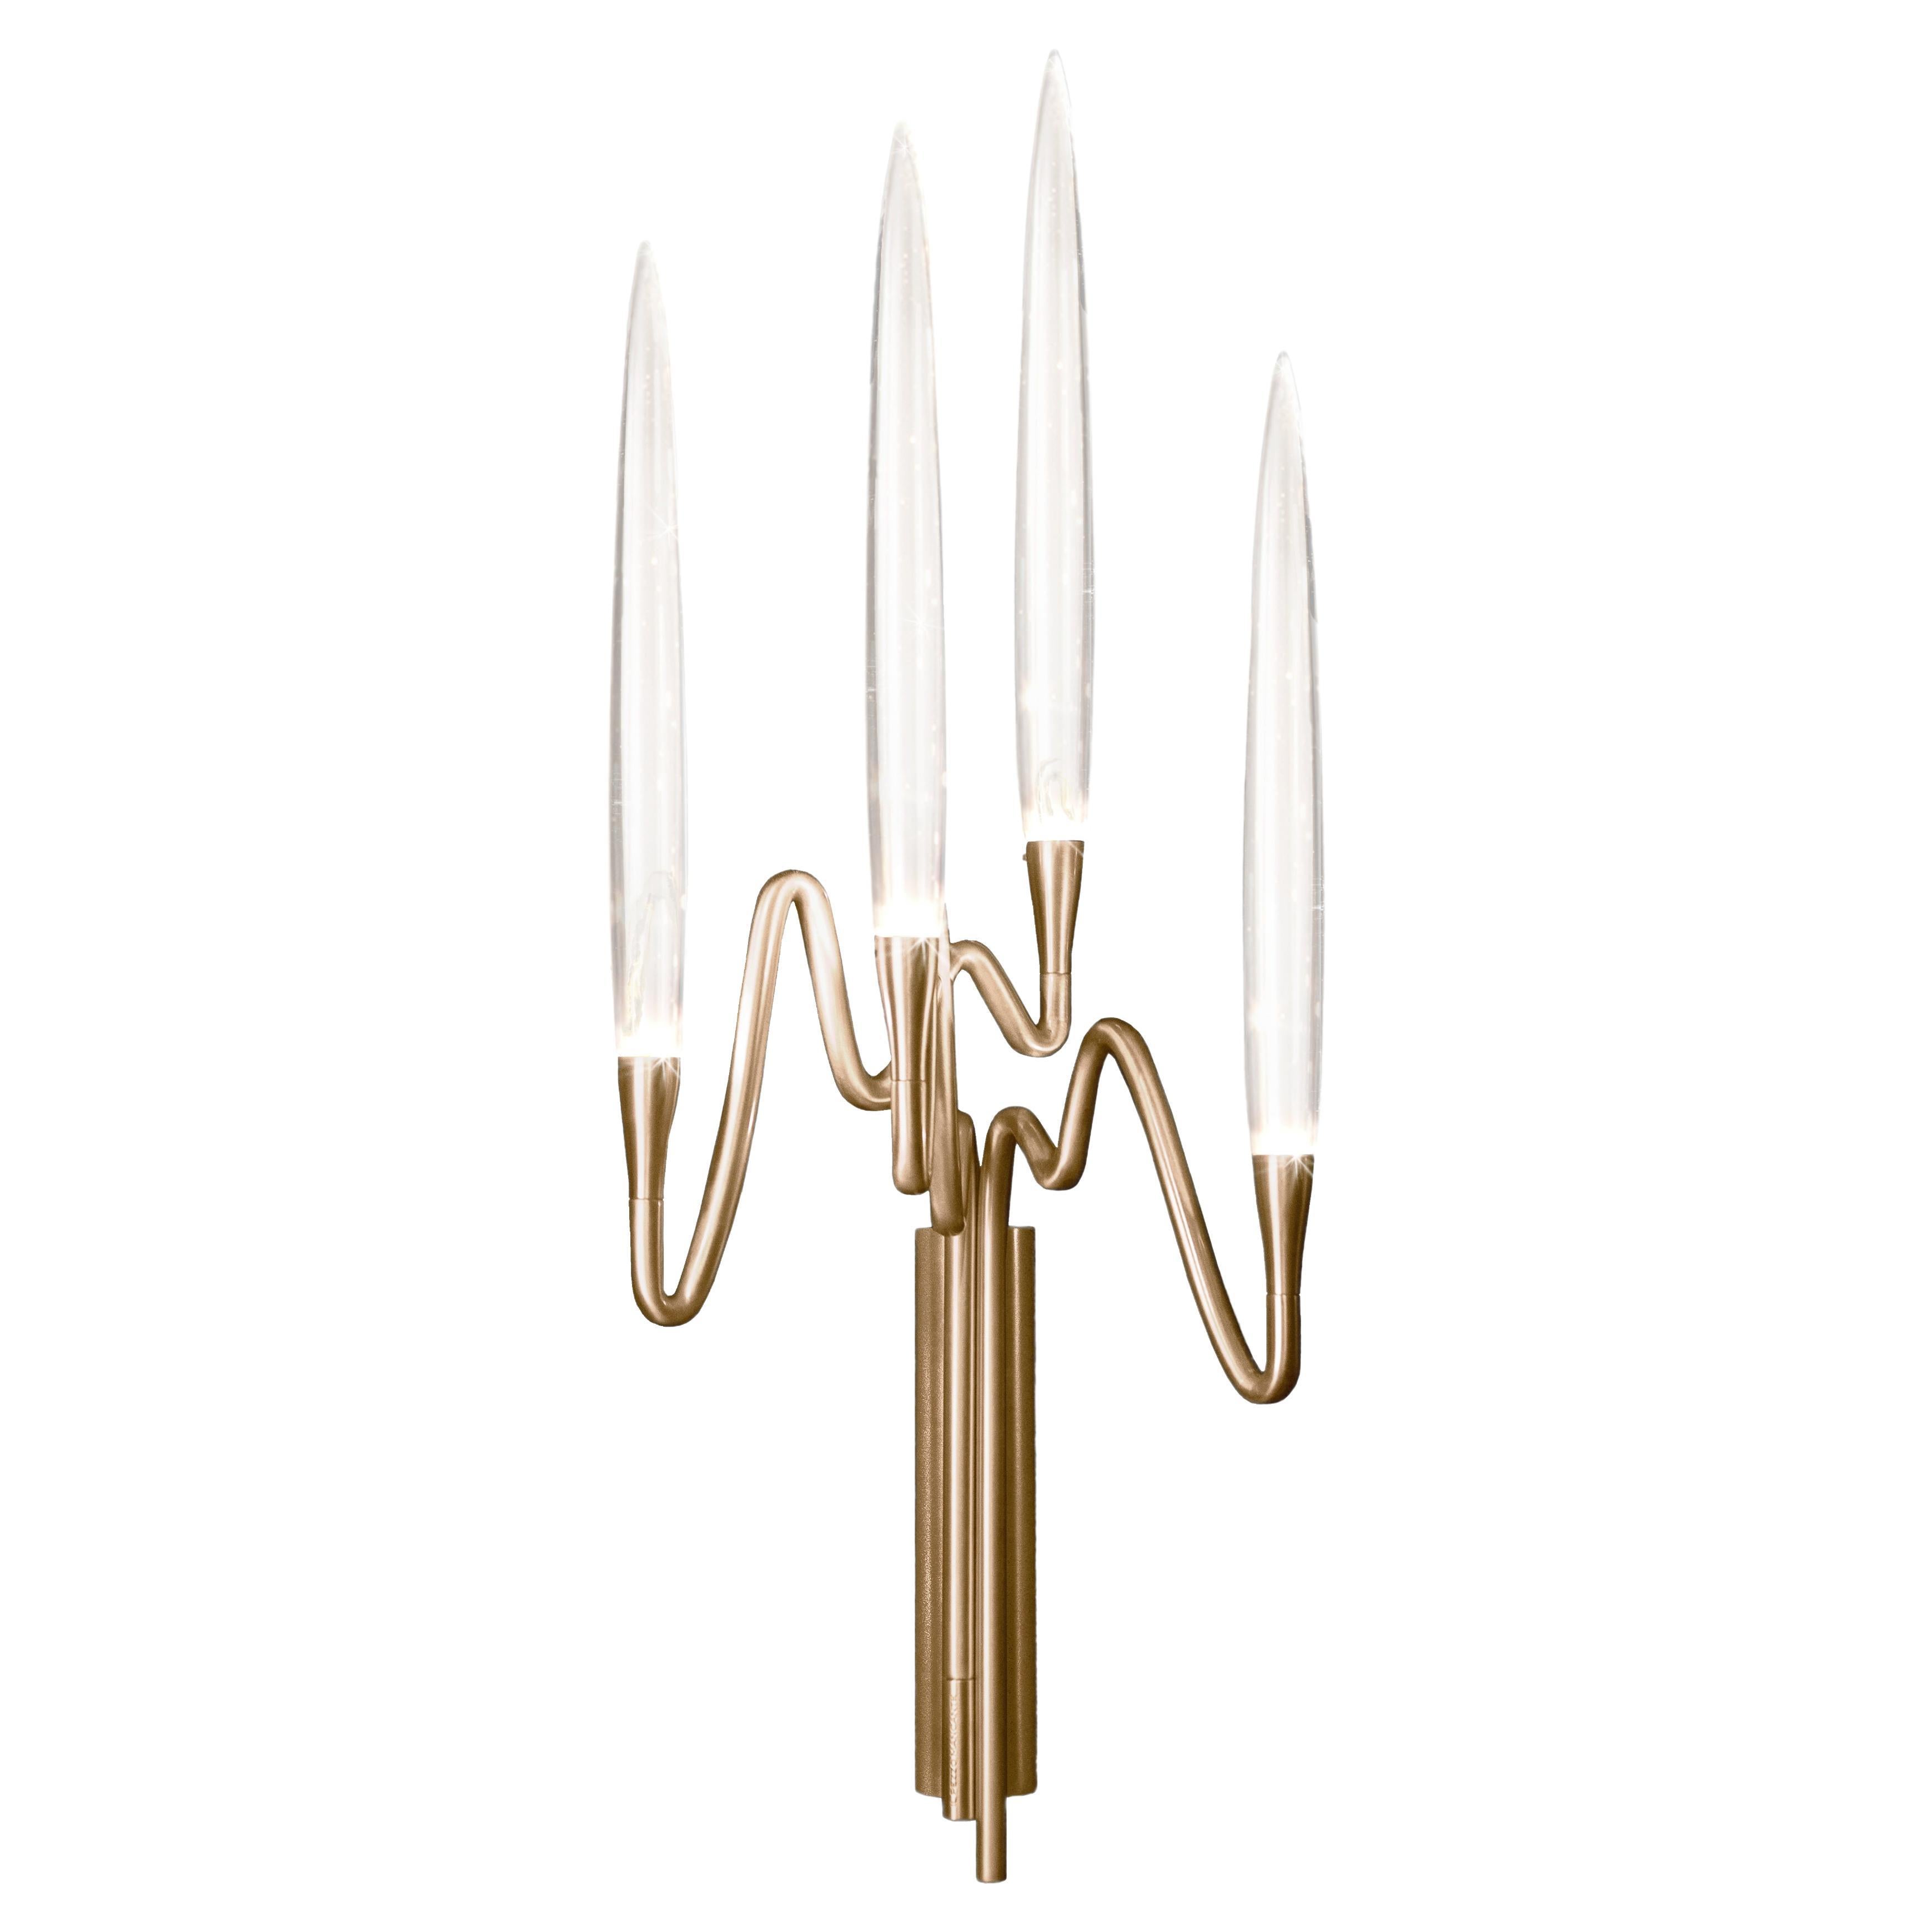 "Il Pezzo 3 Wall Sconce" - width 27cm/10.3" - satin brass - crystal - LEDs For Sale